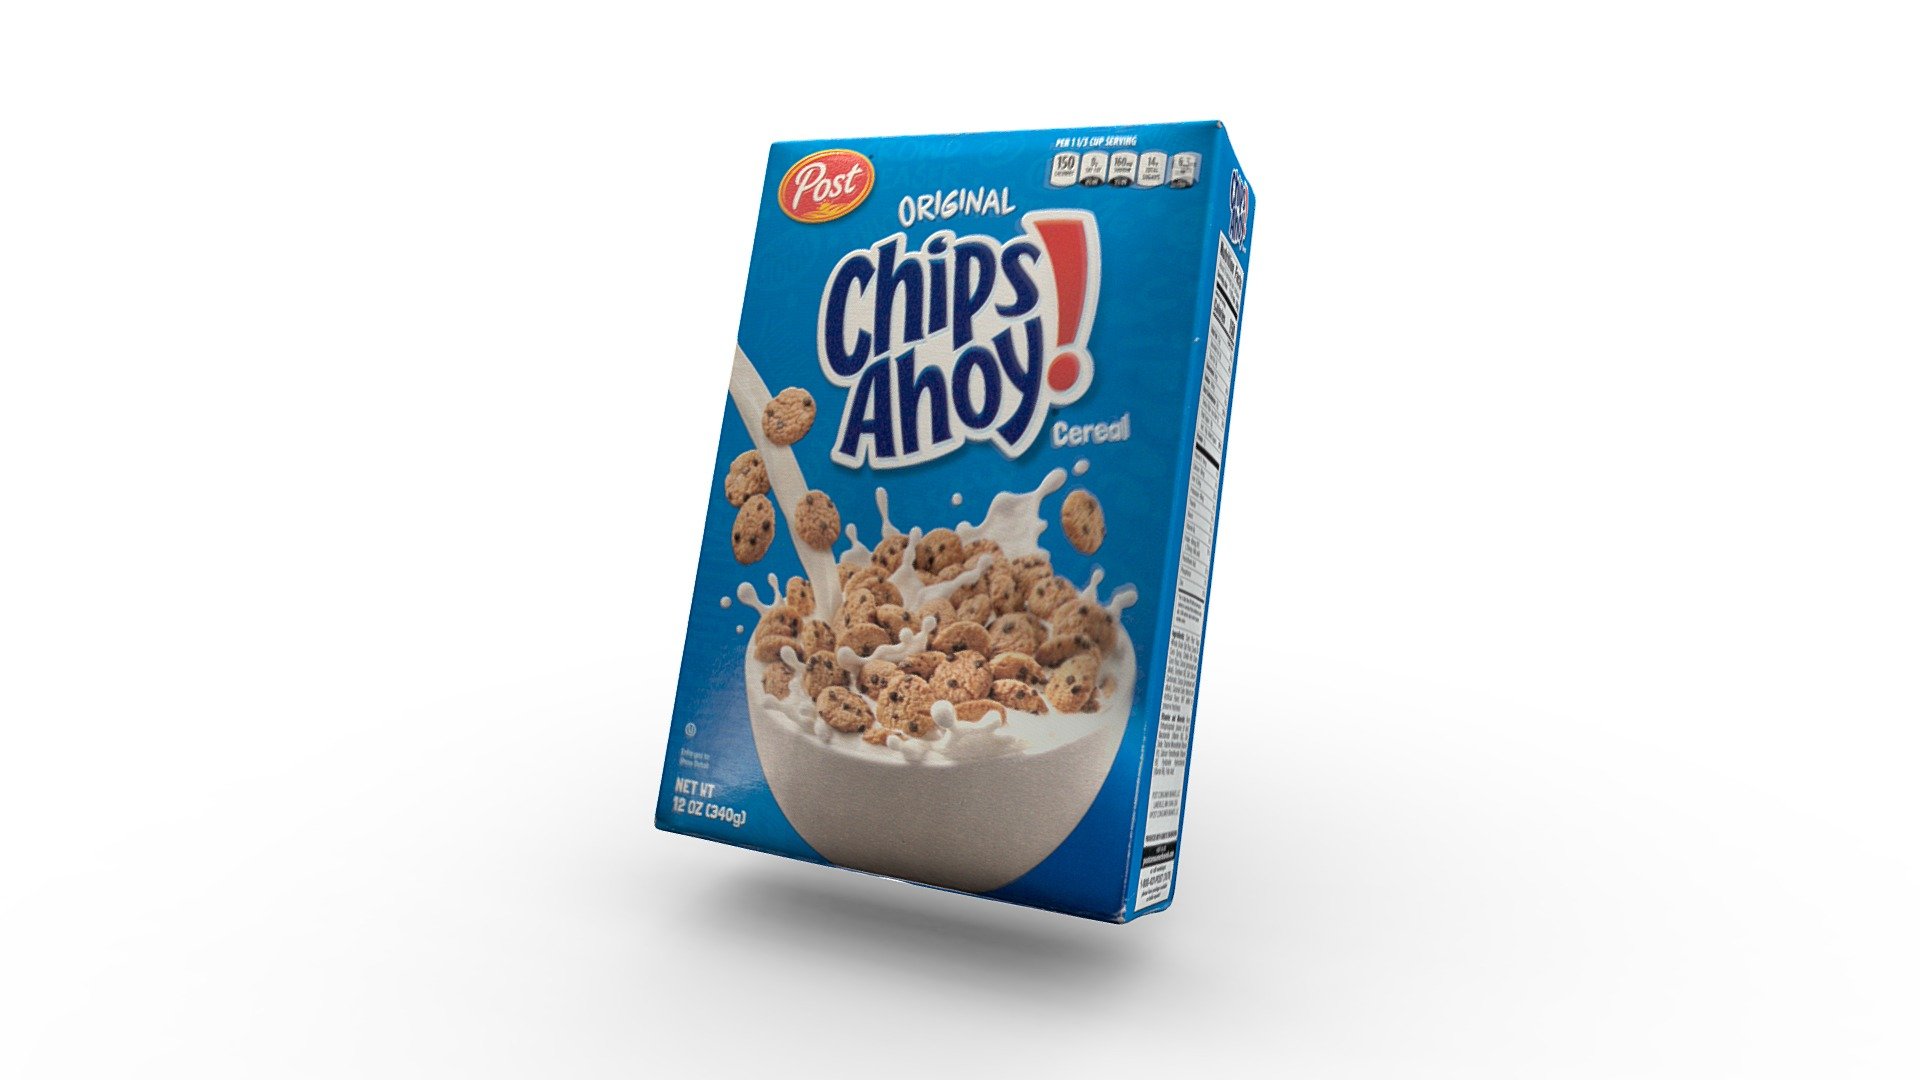 3D Scan of a Chips Ahoy! cereal box.

Chips Ahoy is the cereal for those who love chocolate chip cookies&hellip;and seriously who doesn’t – try this chip off the old block! Start your day with a cereal celebration that puts the taste of America’s Favorite Chocolate Chip Cookie right into your breakfast bowl 3d model